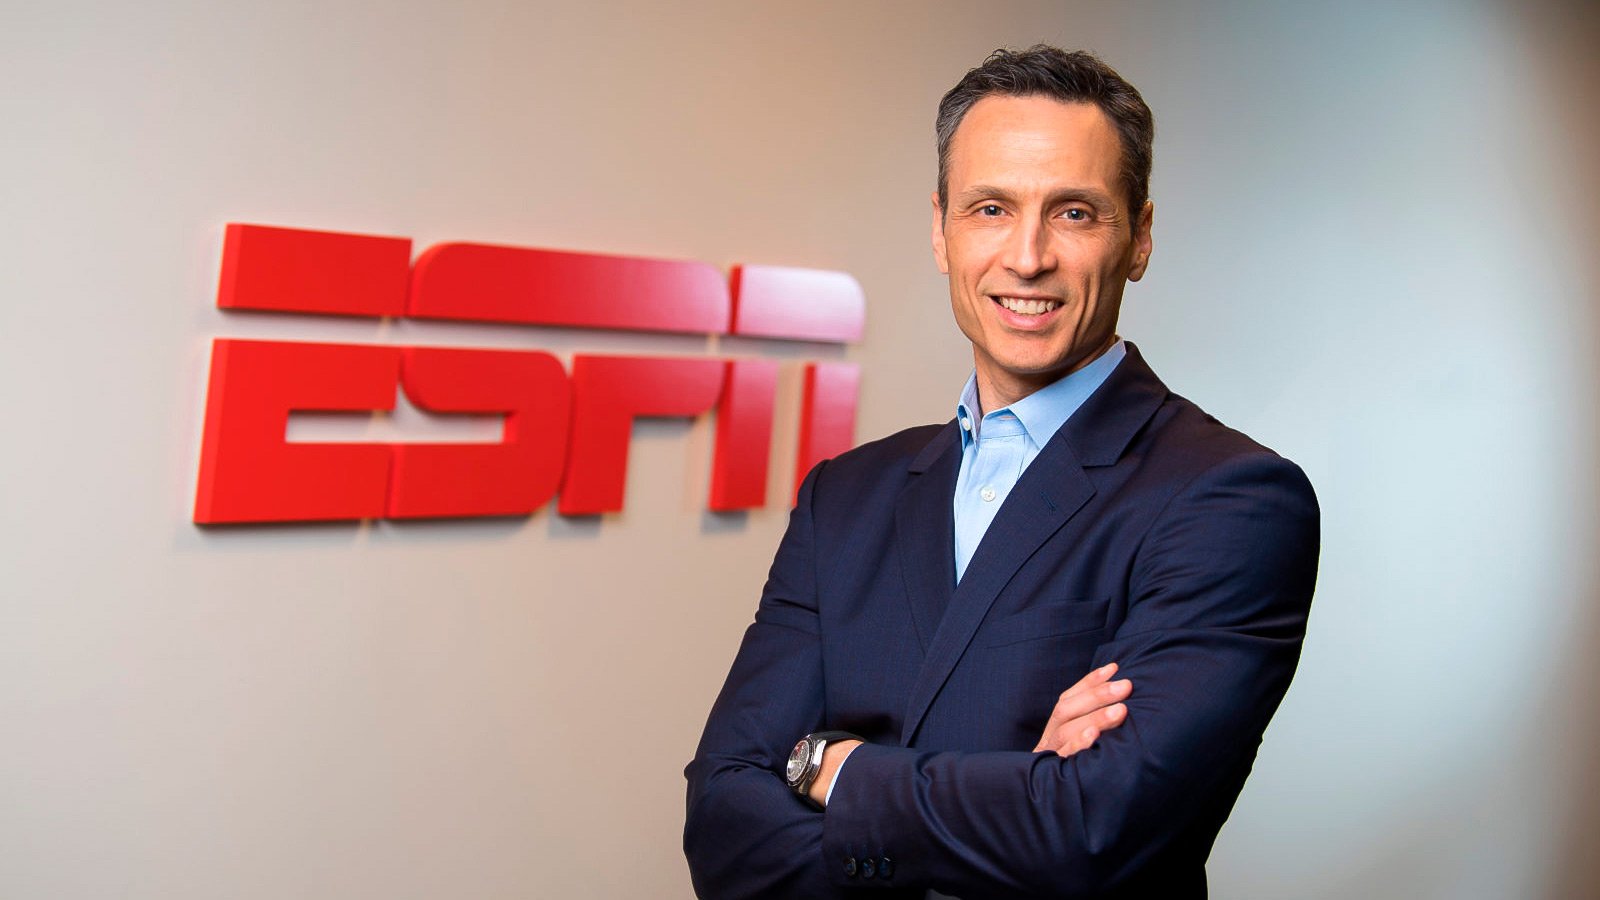 ESPN Chairman Jimmy Pitaro says he does not anticipate any "imminent" sports betting deal